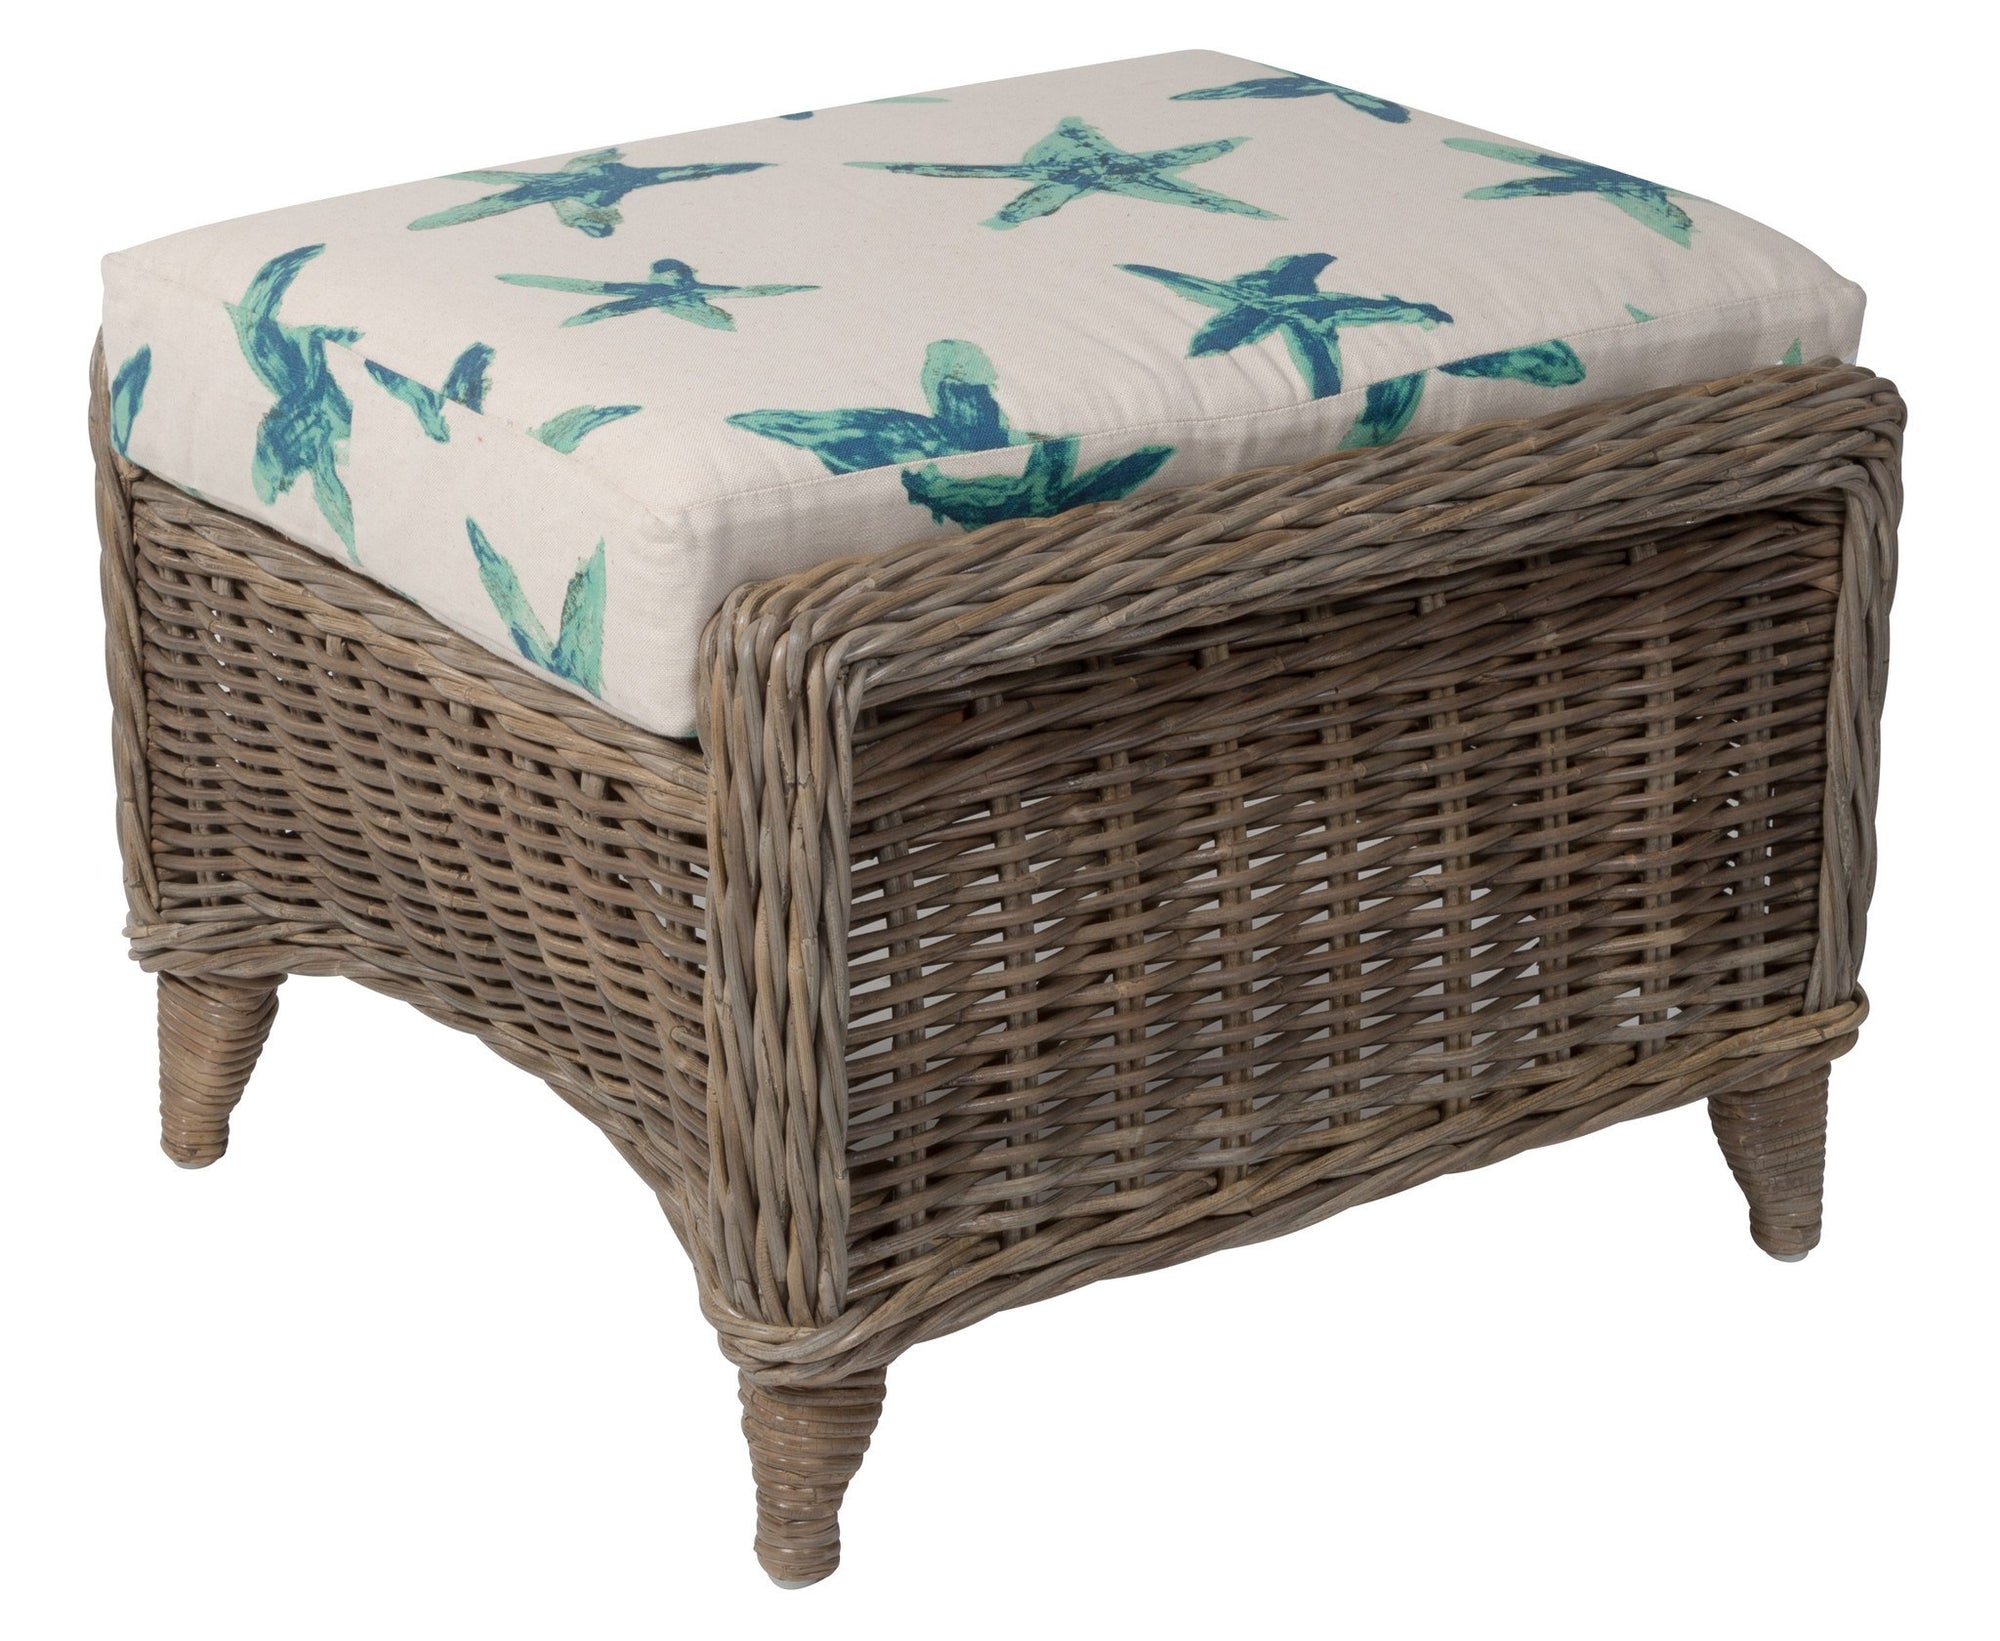 Designer Wicker & Rattan By Tribor Conservatory Ottoman by Designer Wicker from Tribor Ottoman - Rattan Imports